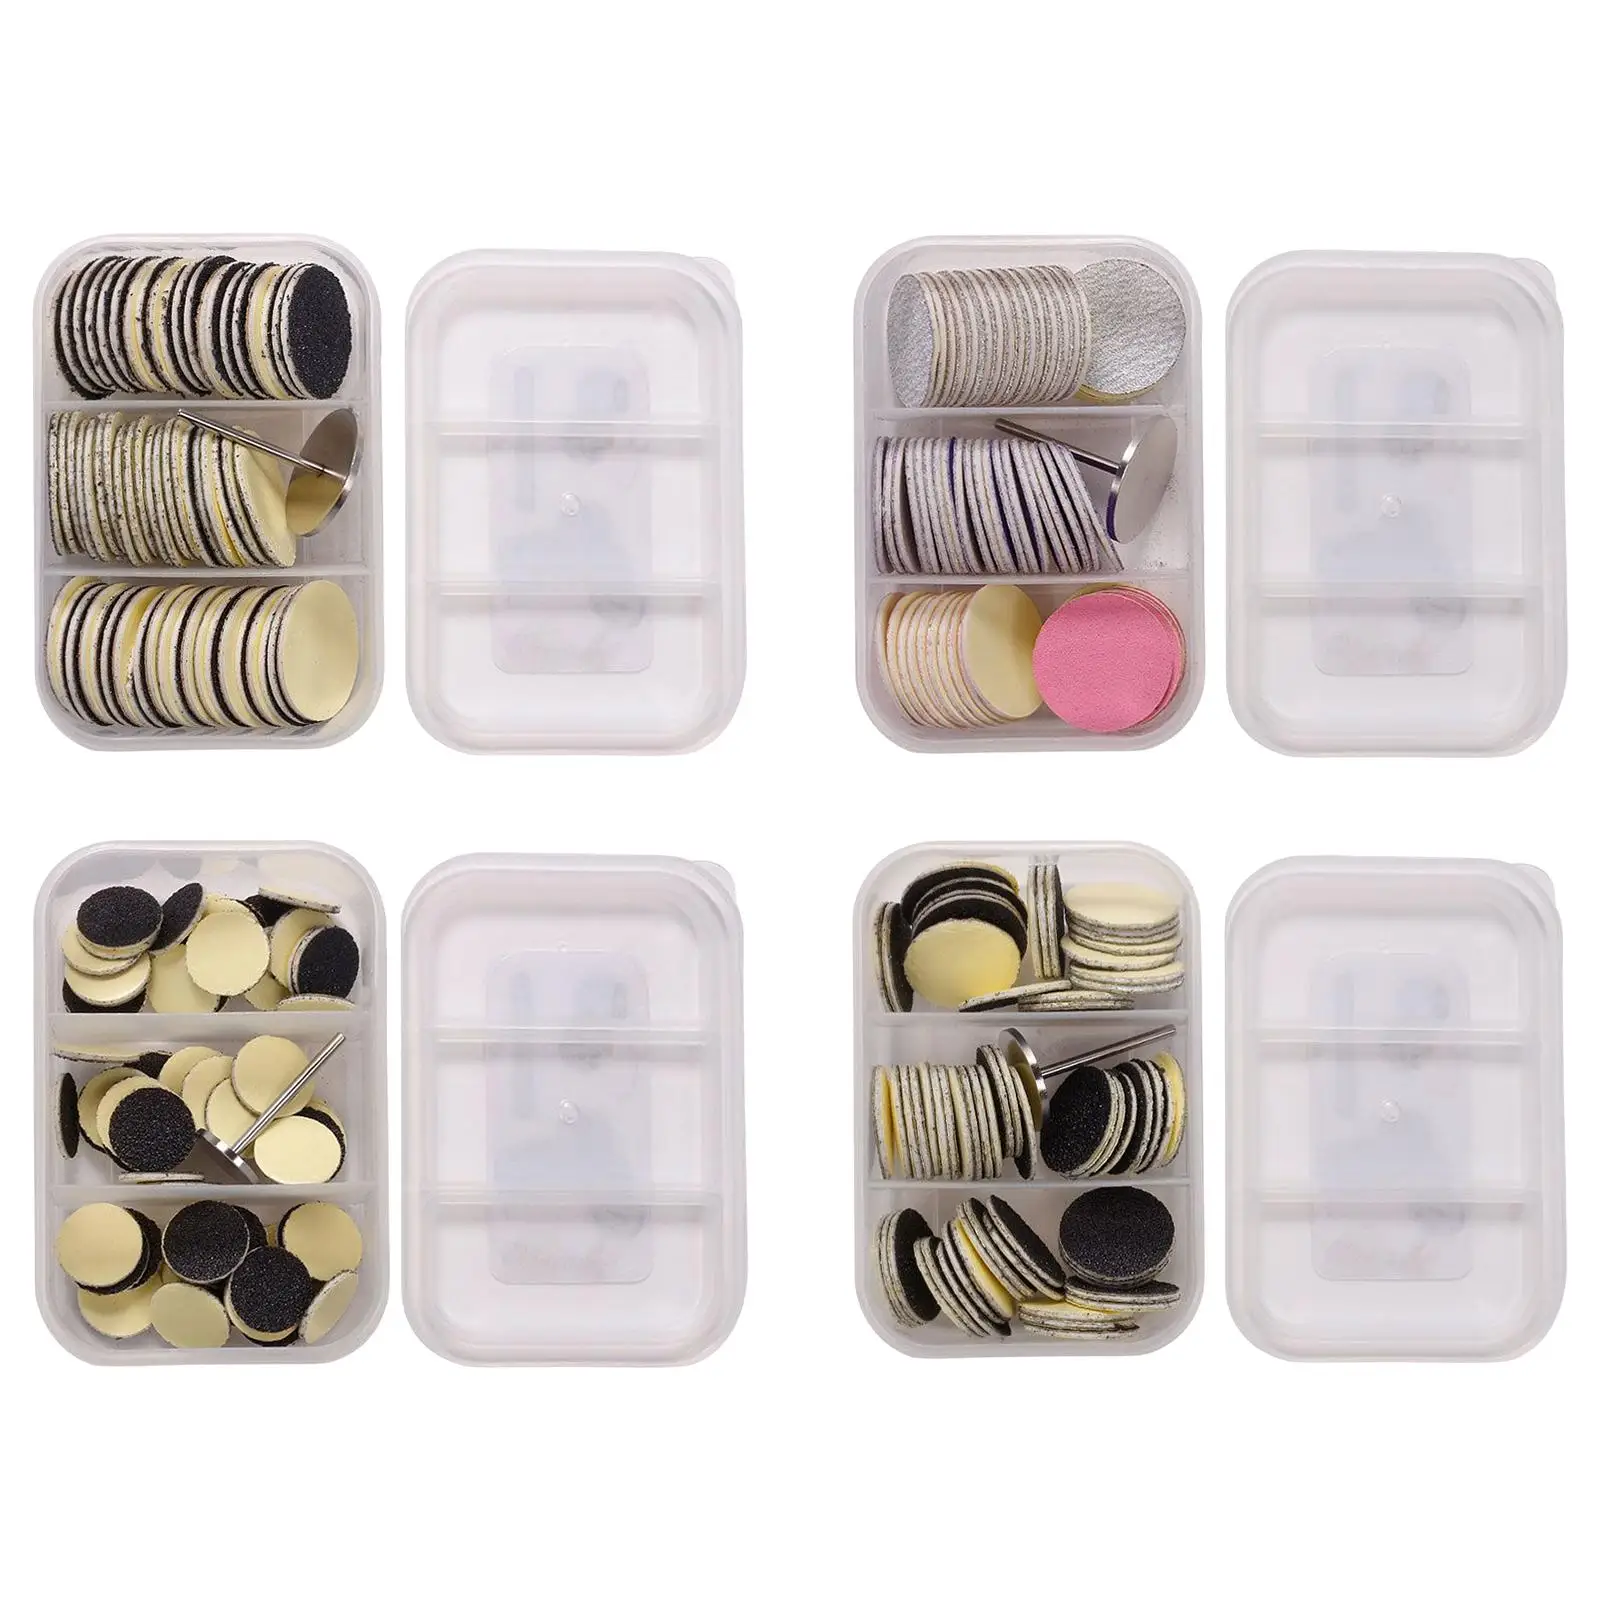 60 Pieces Replaceable Sanding Papers Self Adhesive with Storage Case Sanding Discs for Skin Electric Drill Grinder Rotary Tools